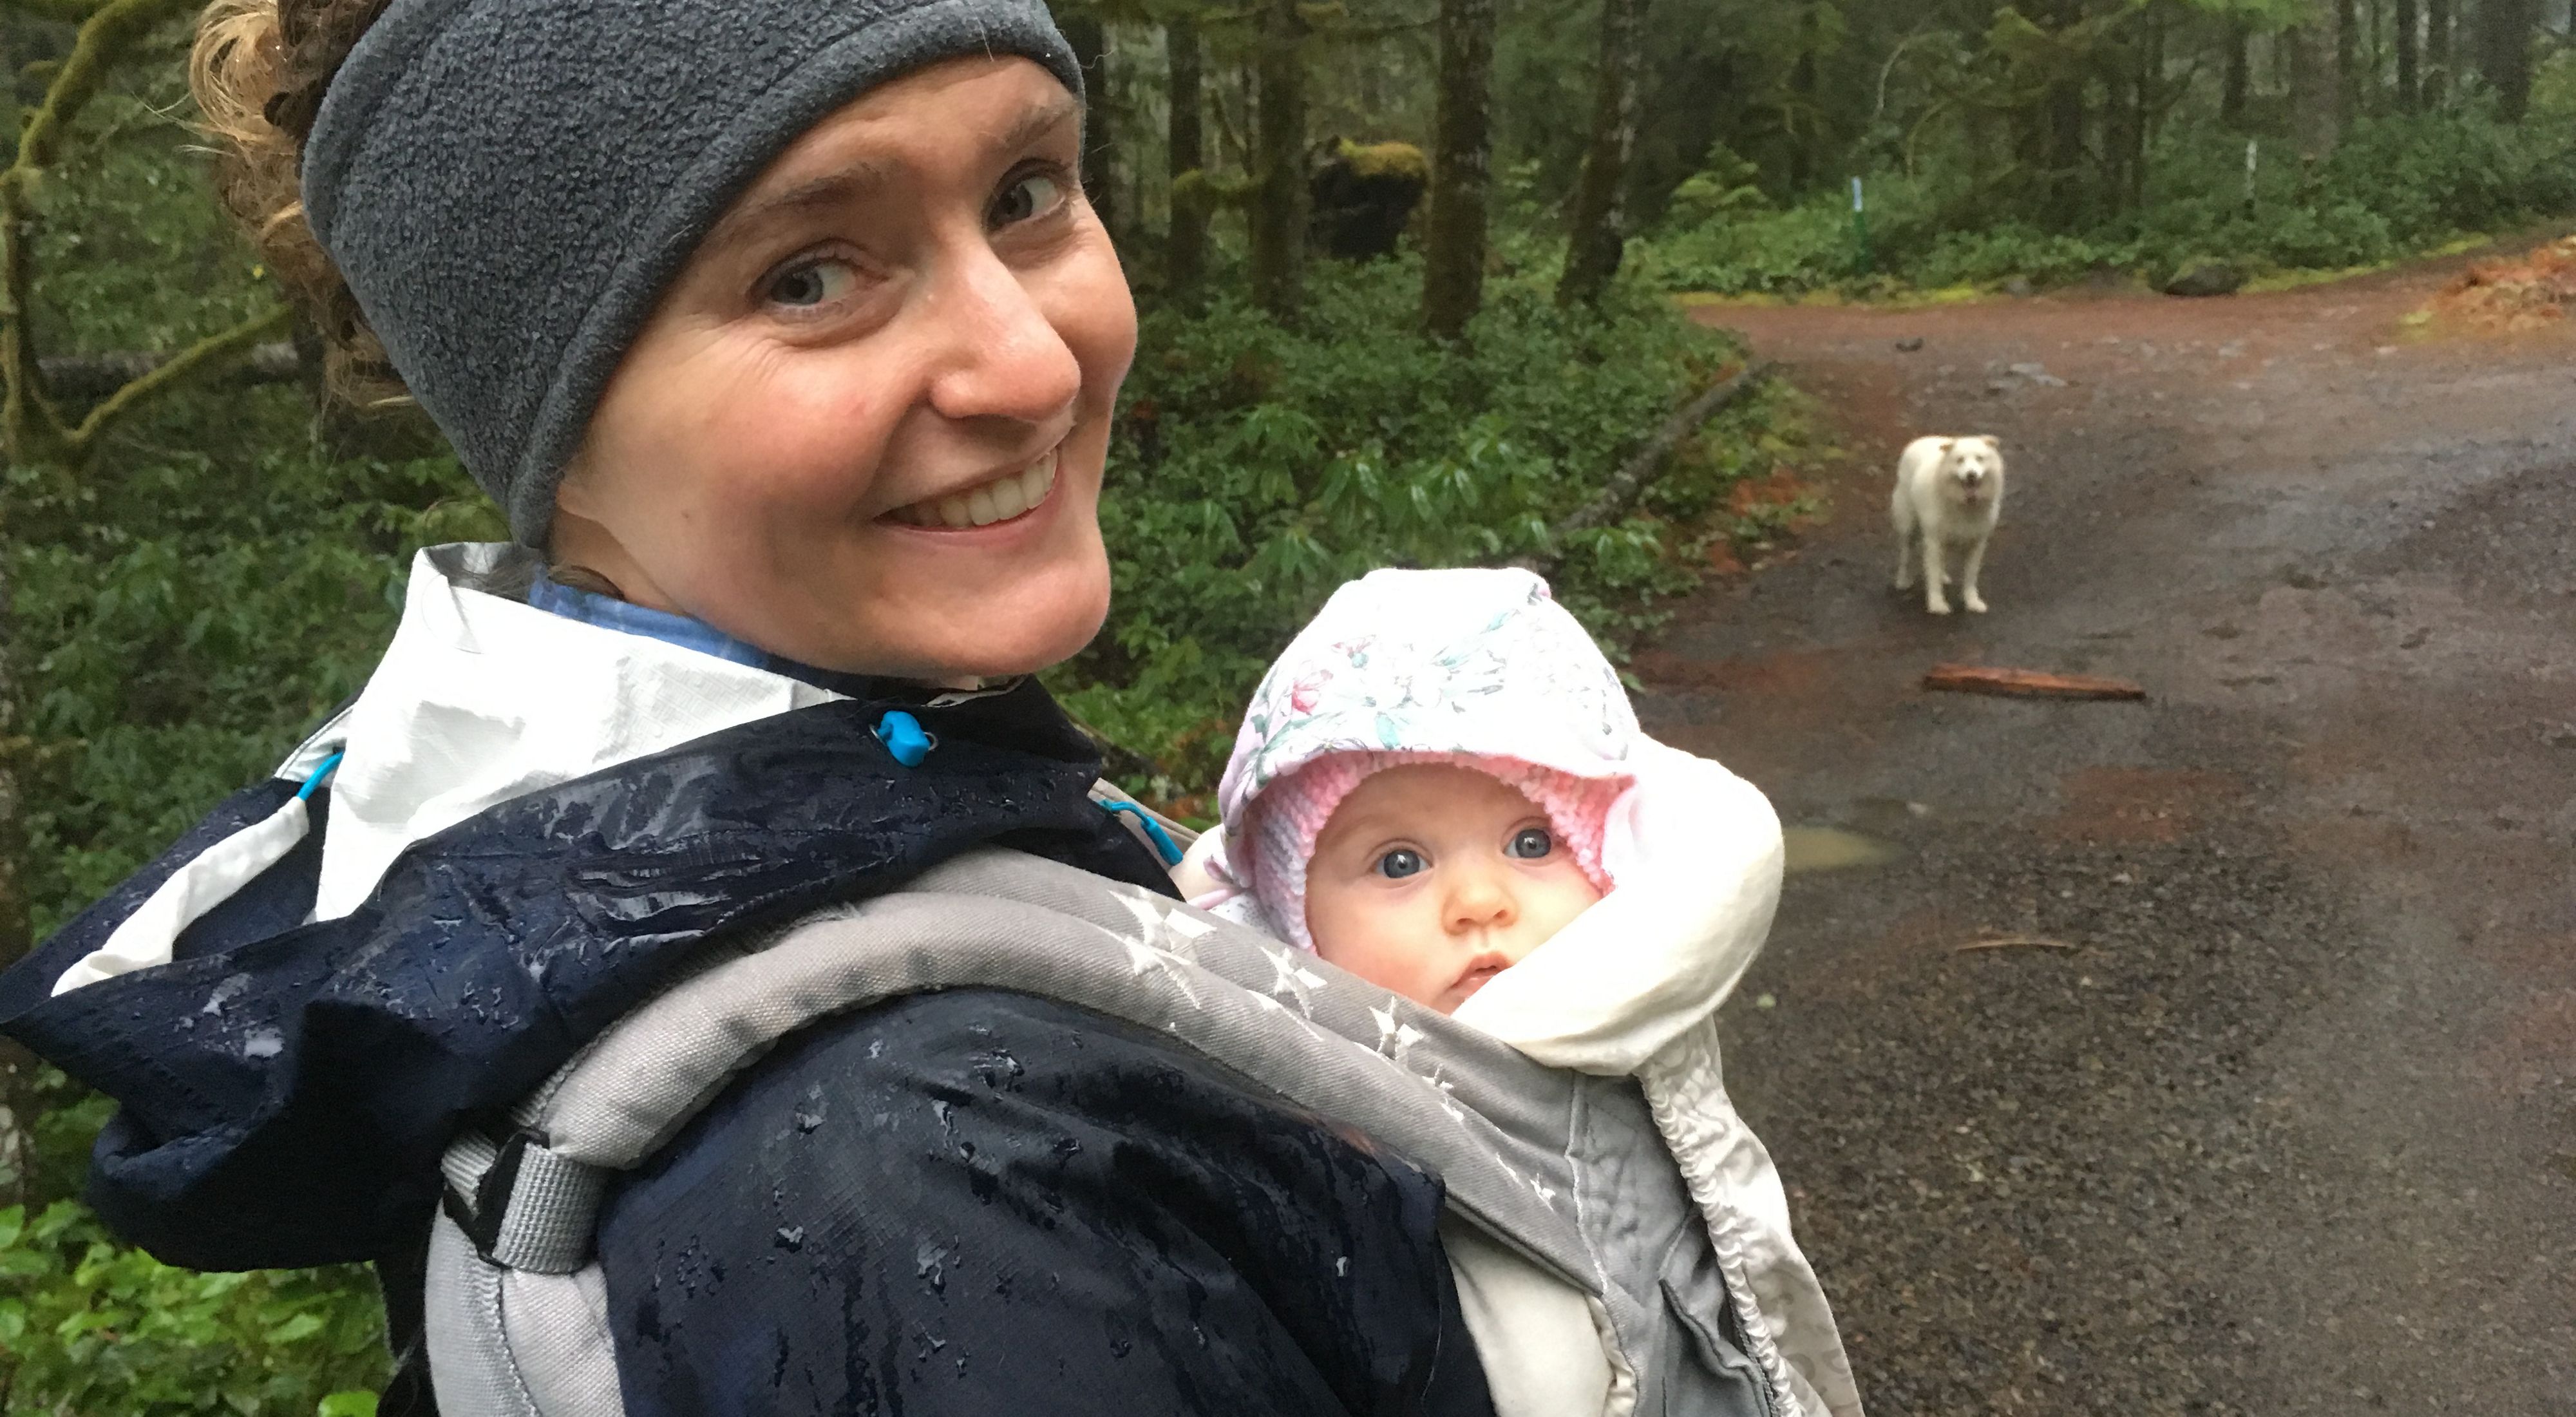 A woman holds a baby and smiles at the camera as they walk through the woods; a white dog stands on a dirt trail in the background.